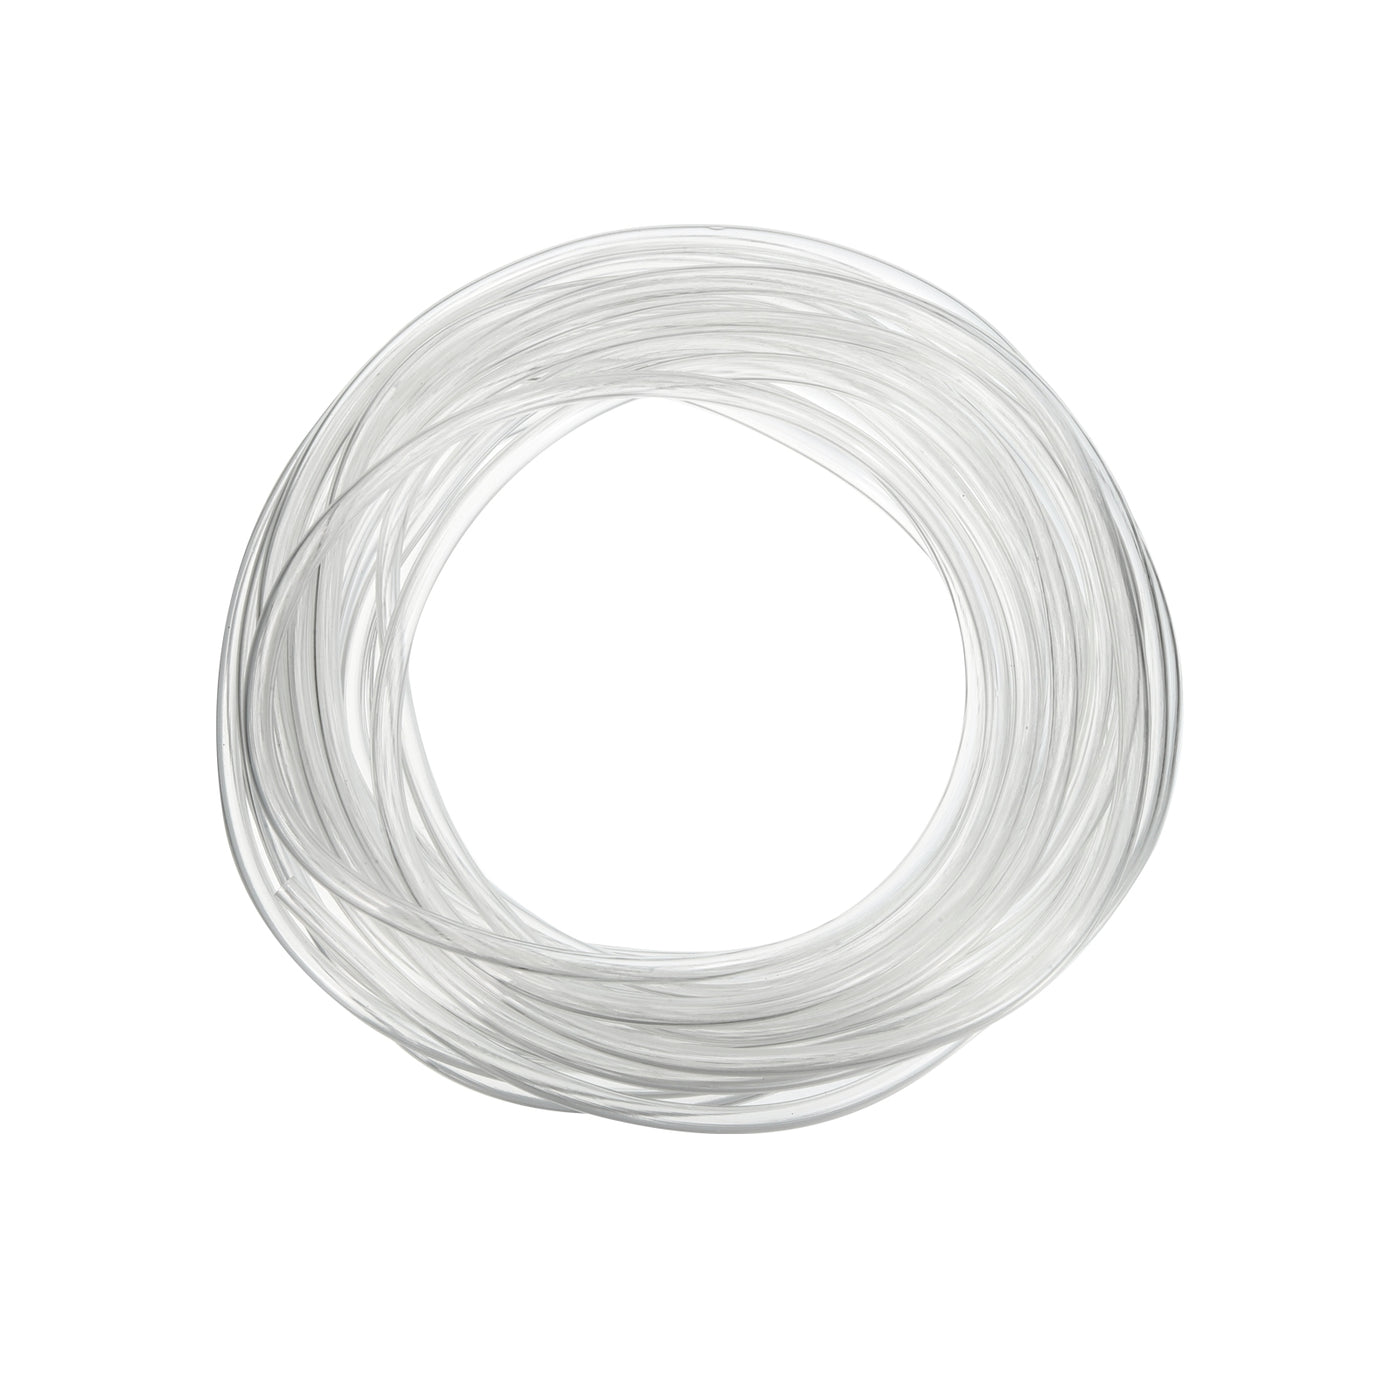 uxcell Uxcell Clear PVC Tube Wire Harness Tubing, 1/8-inch(3mm) ID 23ft Sleeve for Wire Sheathing Wire Protection